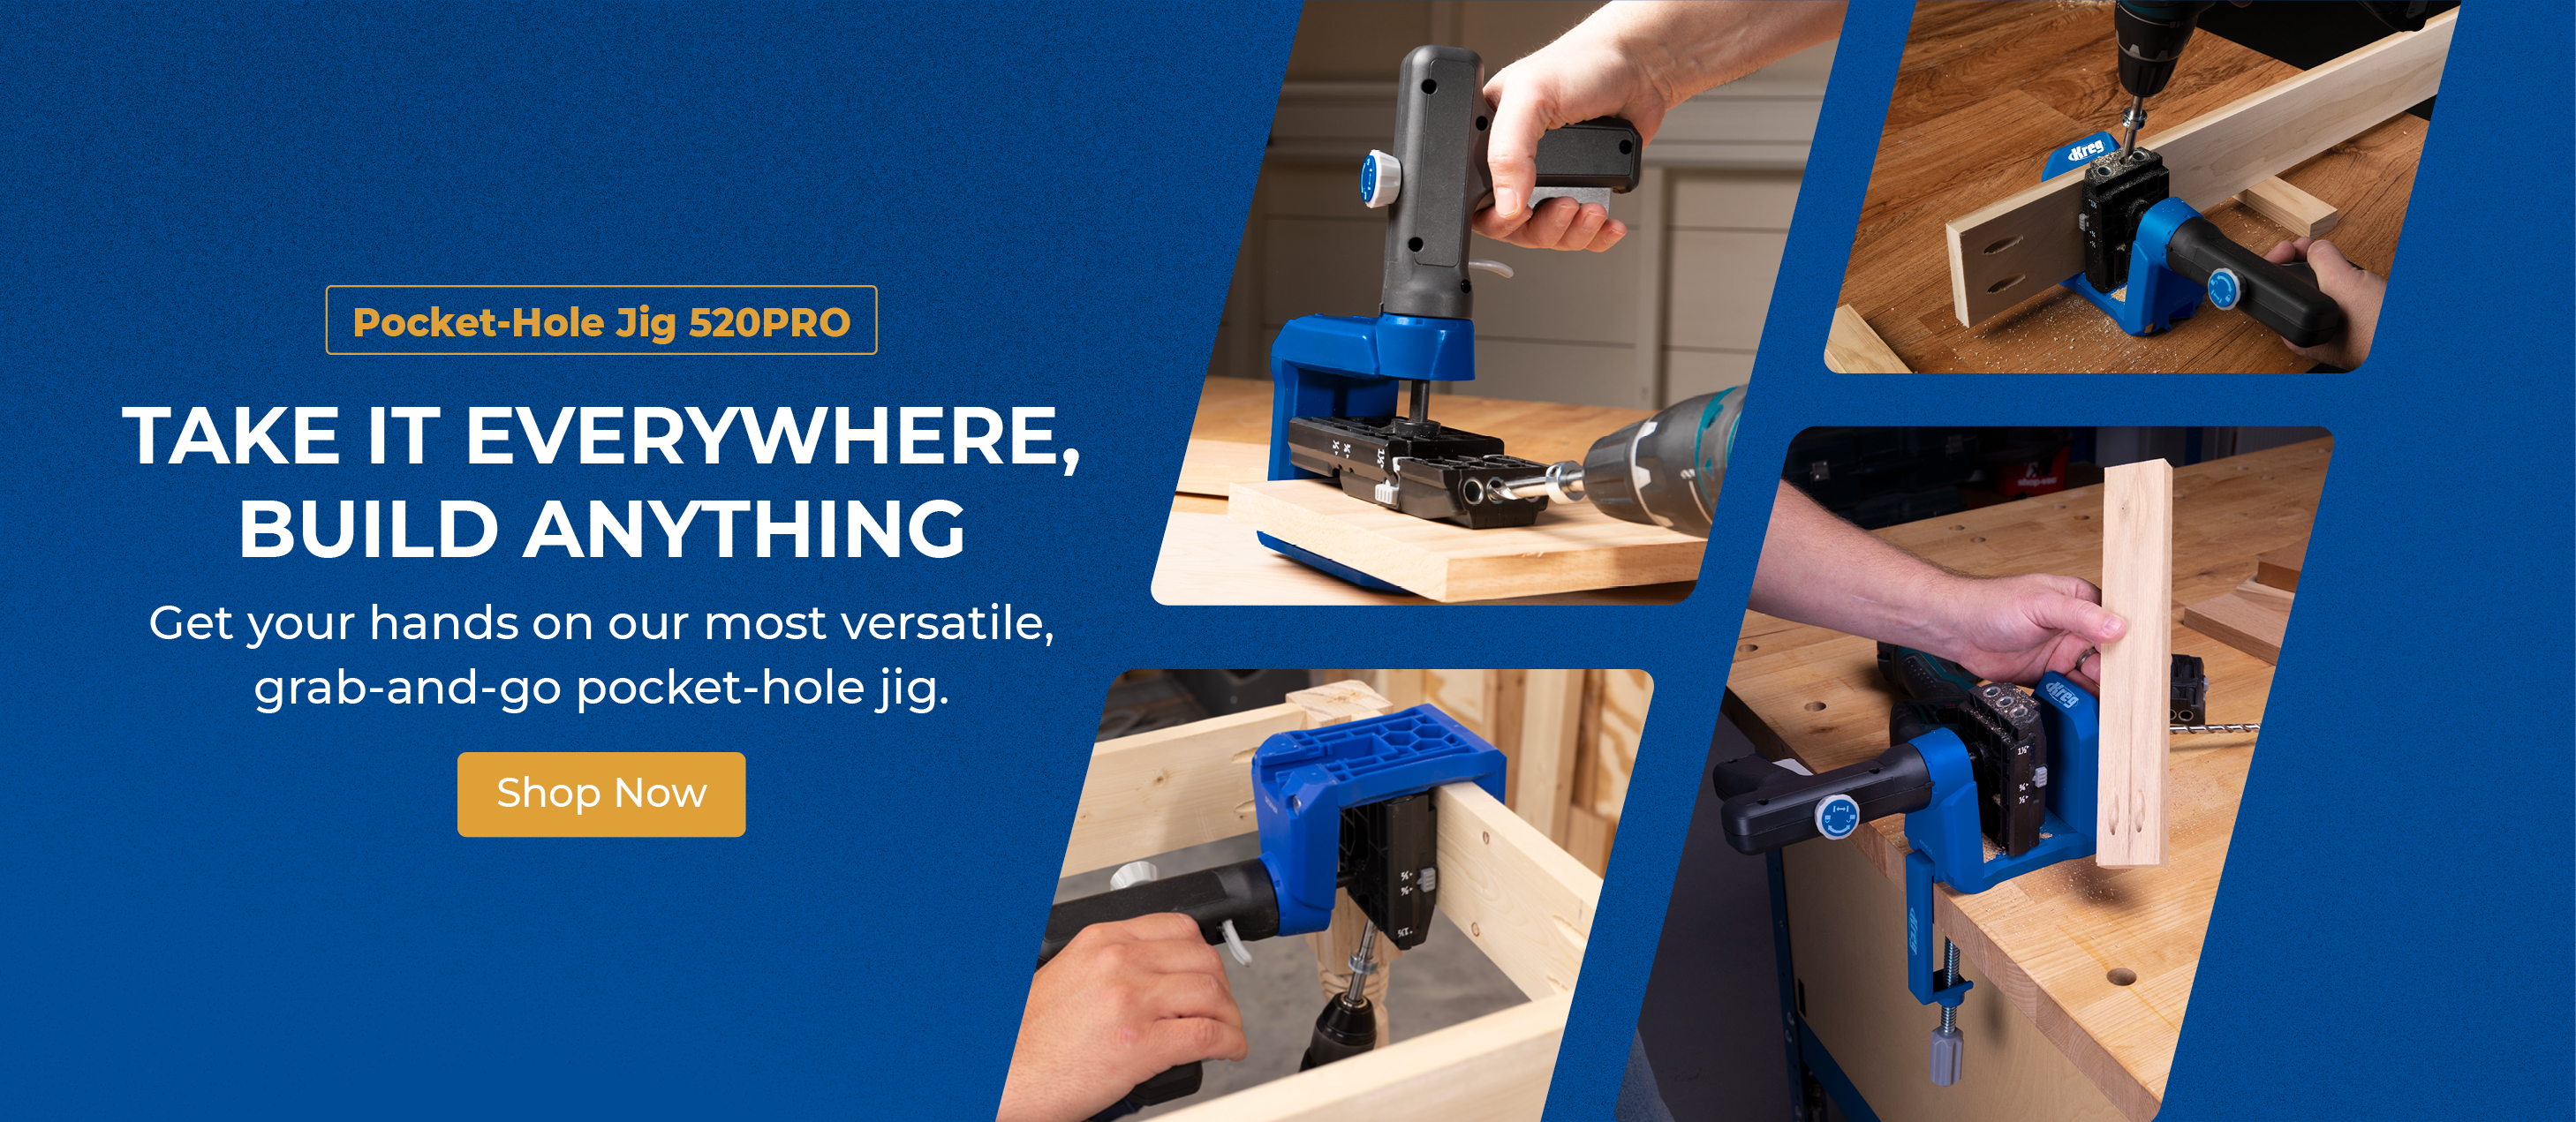 Compare and select your pocket-hole jig, Learn